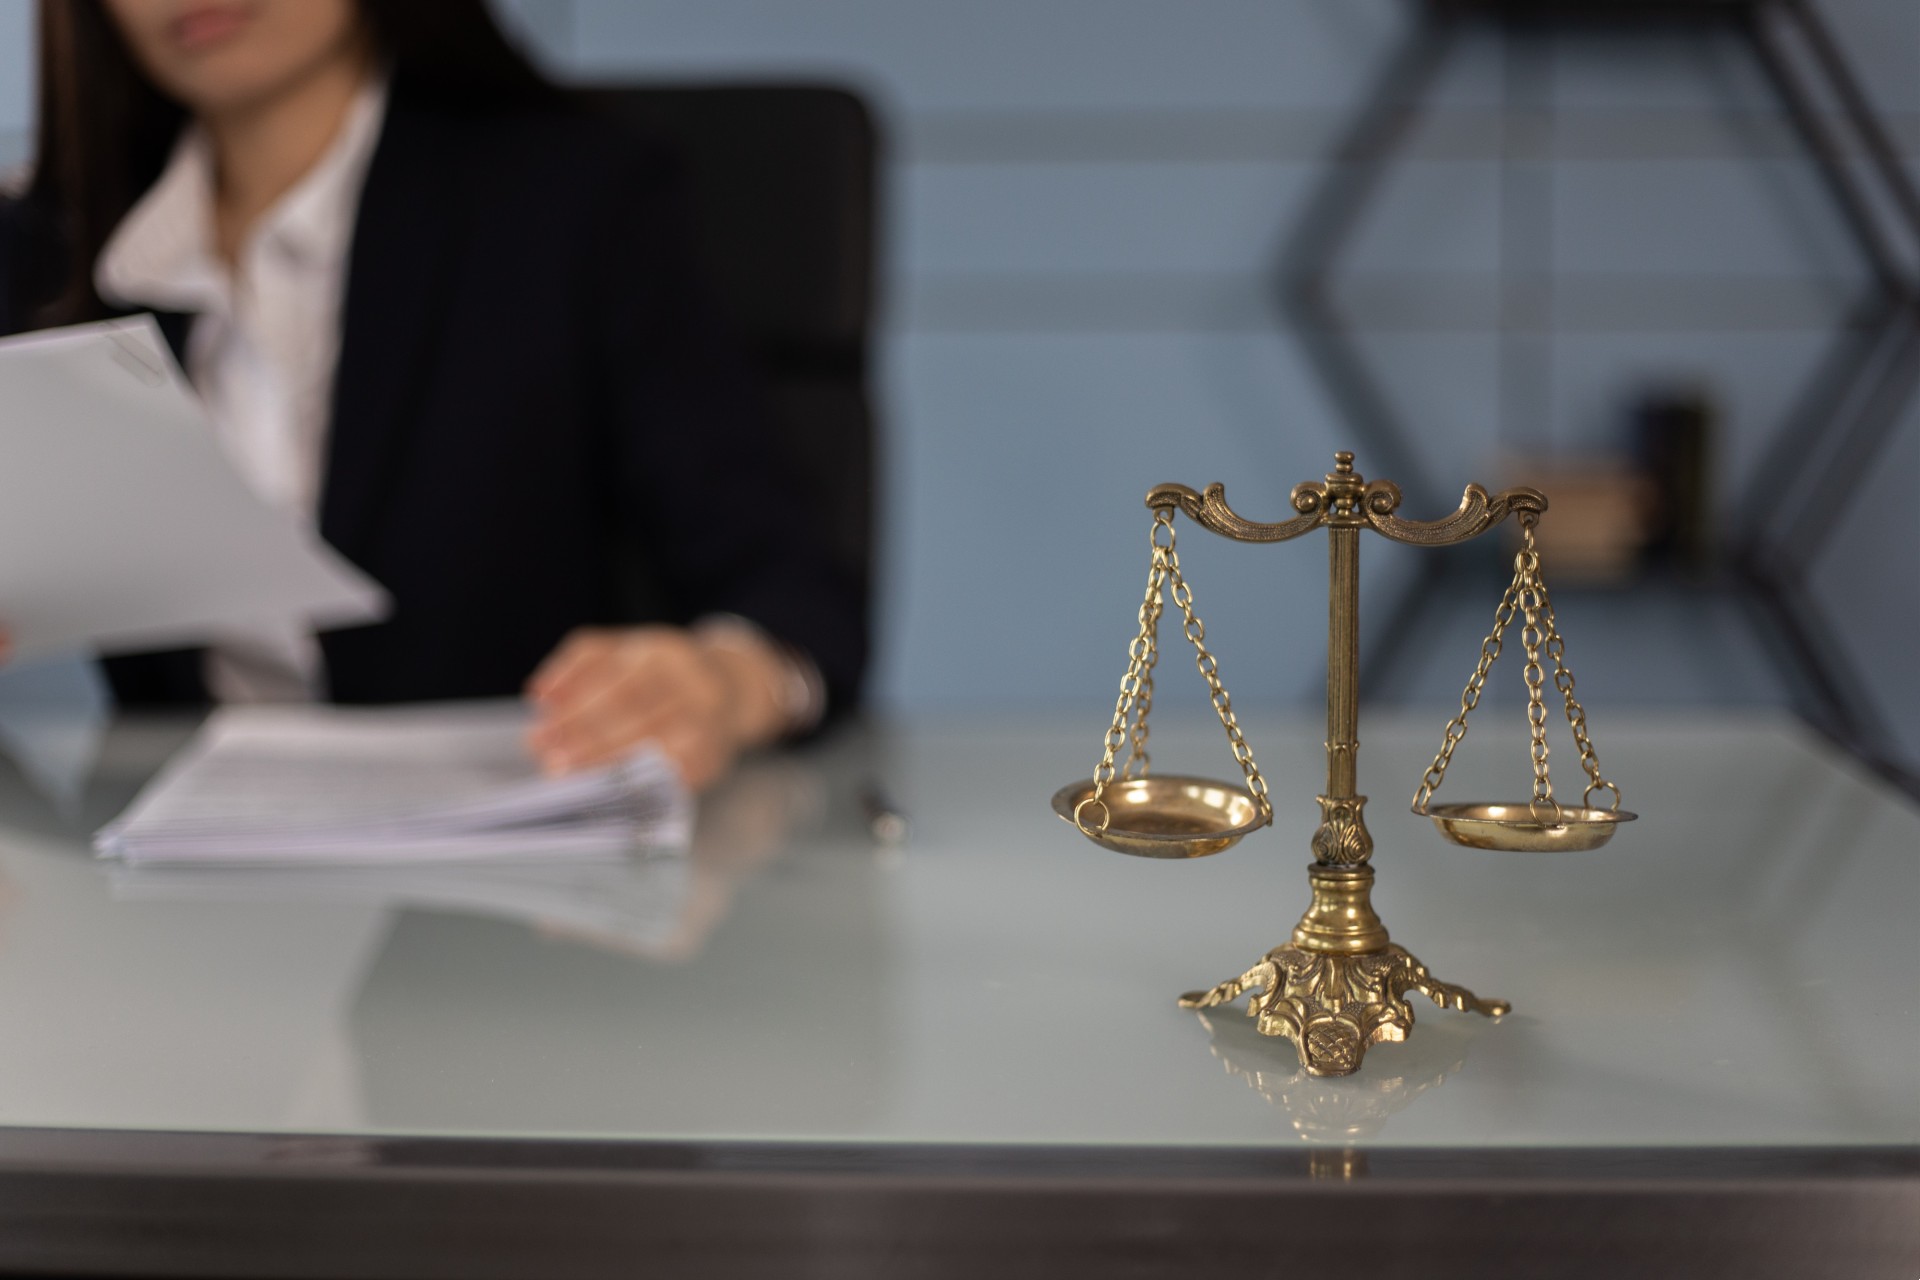 A woman sitting at a desk with scales of justice in the foreground